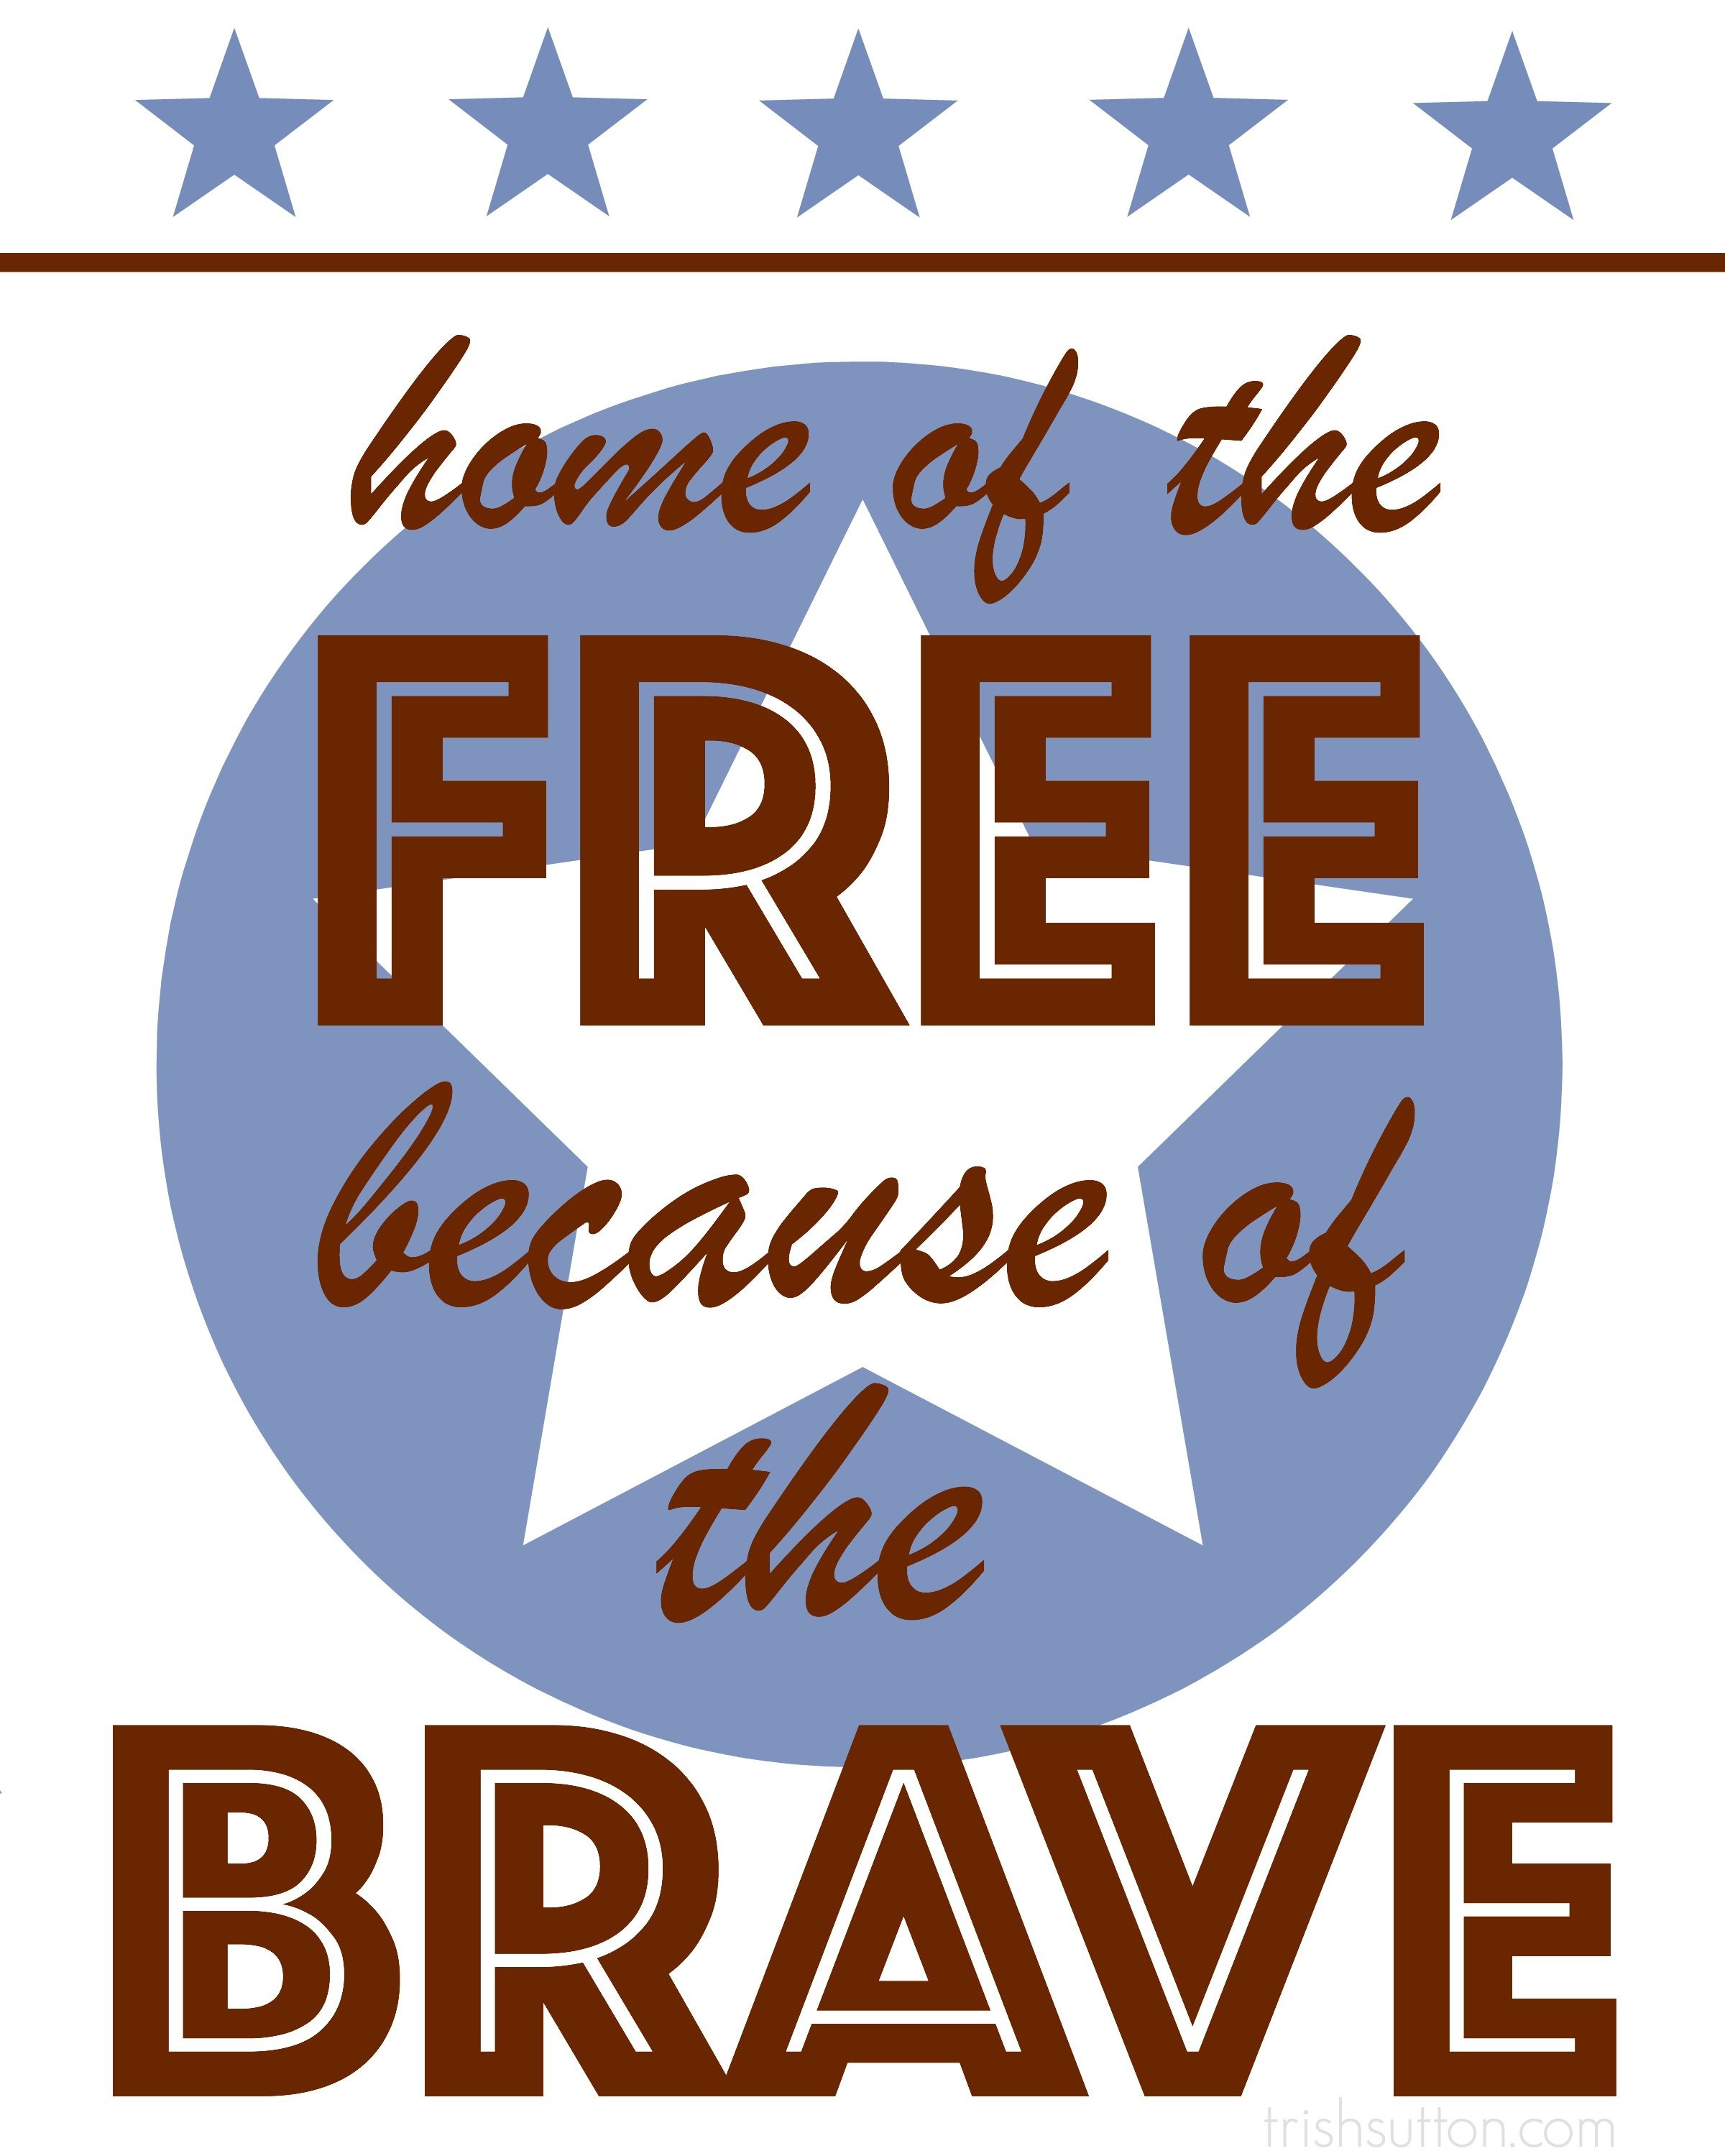 Free Printable; Home Of The Free Because Of The Brave | Trishsutton - Home Of The Free Because Of The Brave Printable